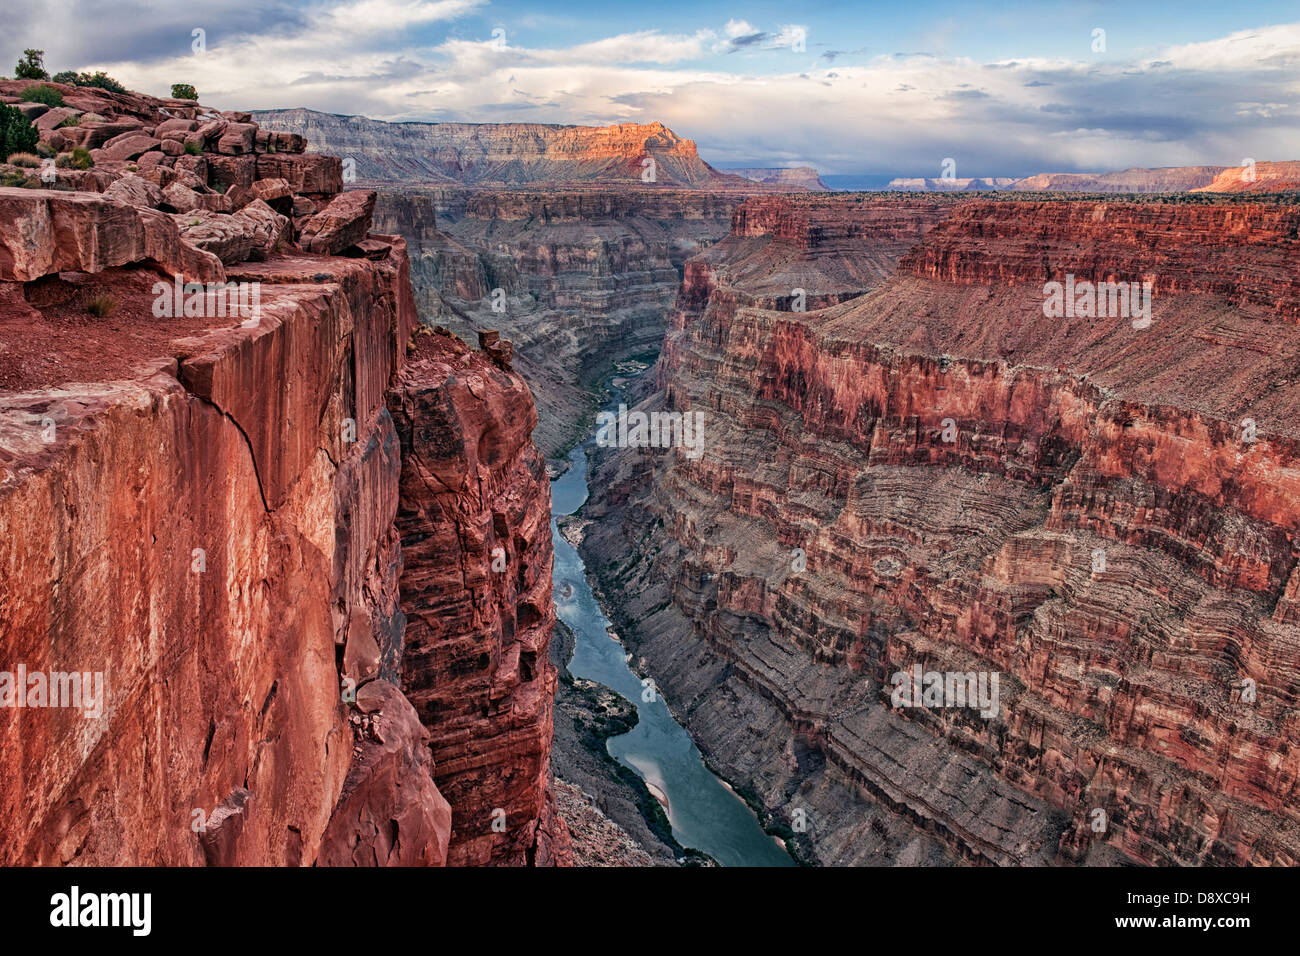 Three thousand foot vertical drop to the Colorado River  from remote Toroweap Overlook in Arizona's Grand Canyon National Park. Stock Photo